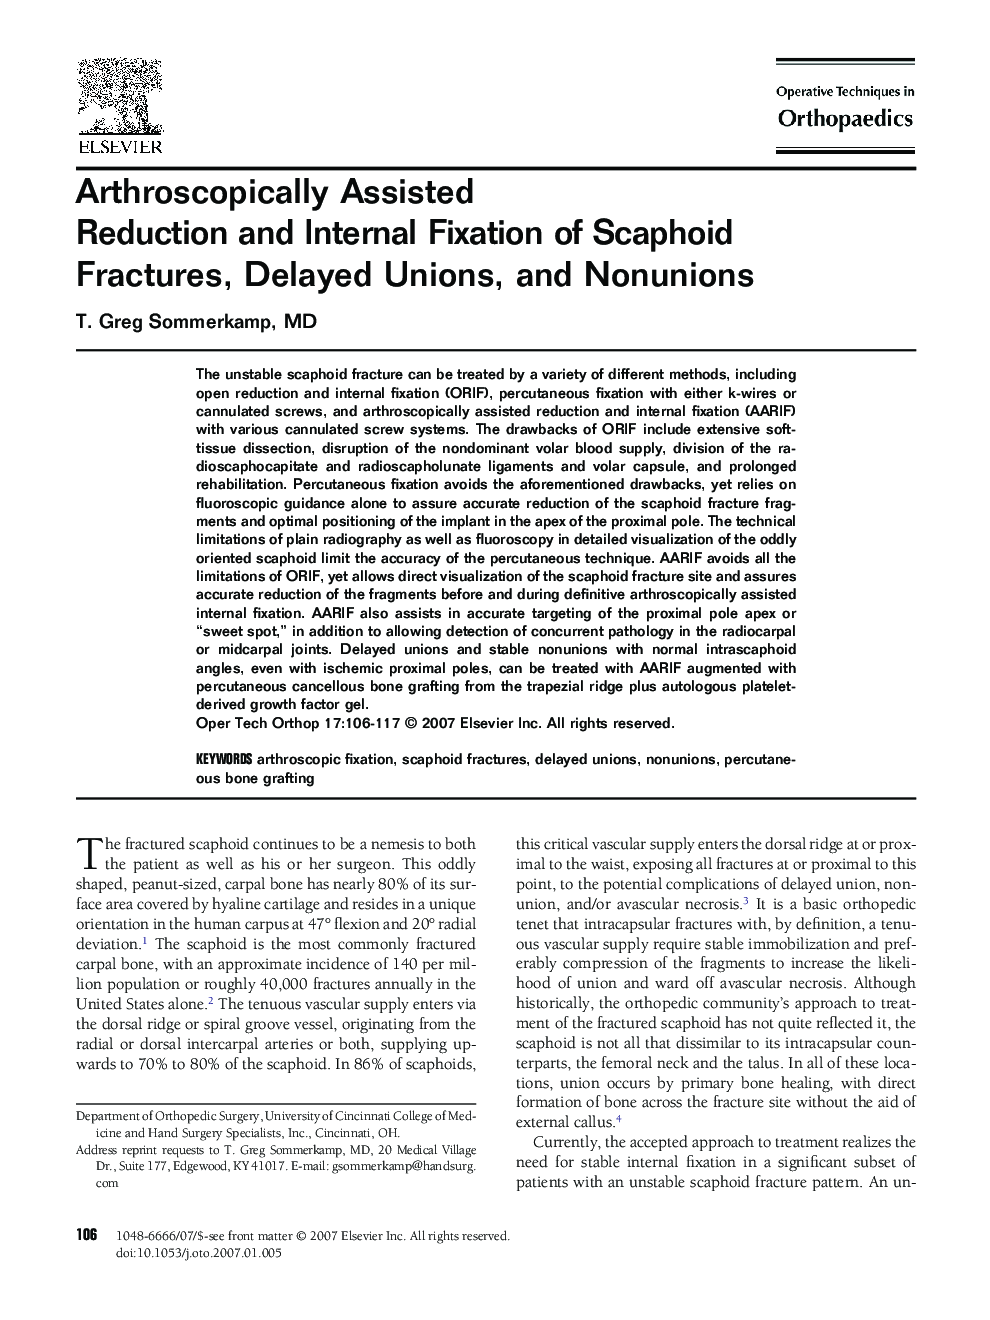 Arthroscopically Assisted Reduction and Internal Fixation of Scaphoid Fractures, Delayed Unions, and Nonunions